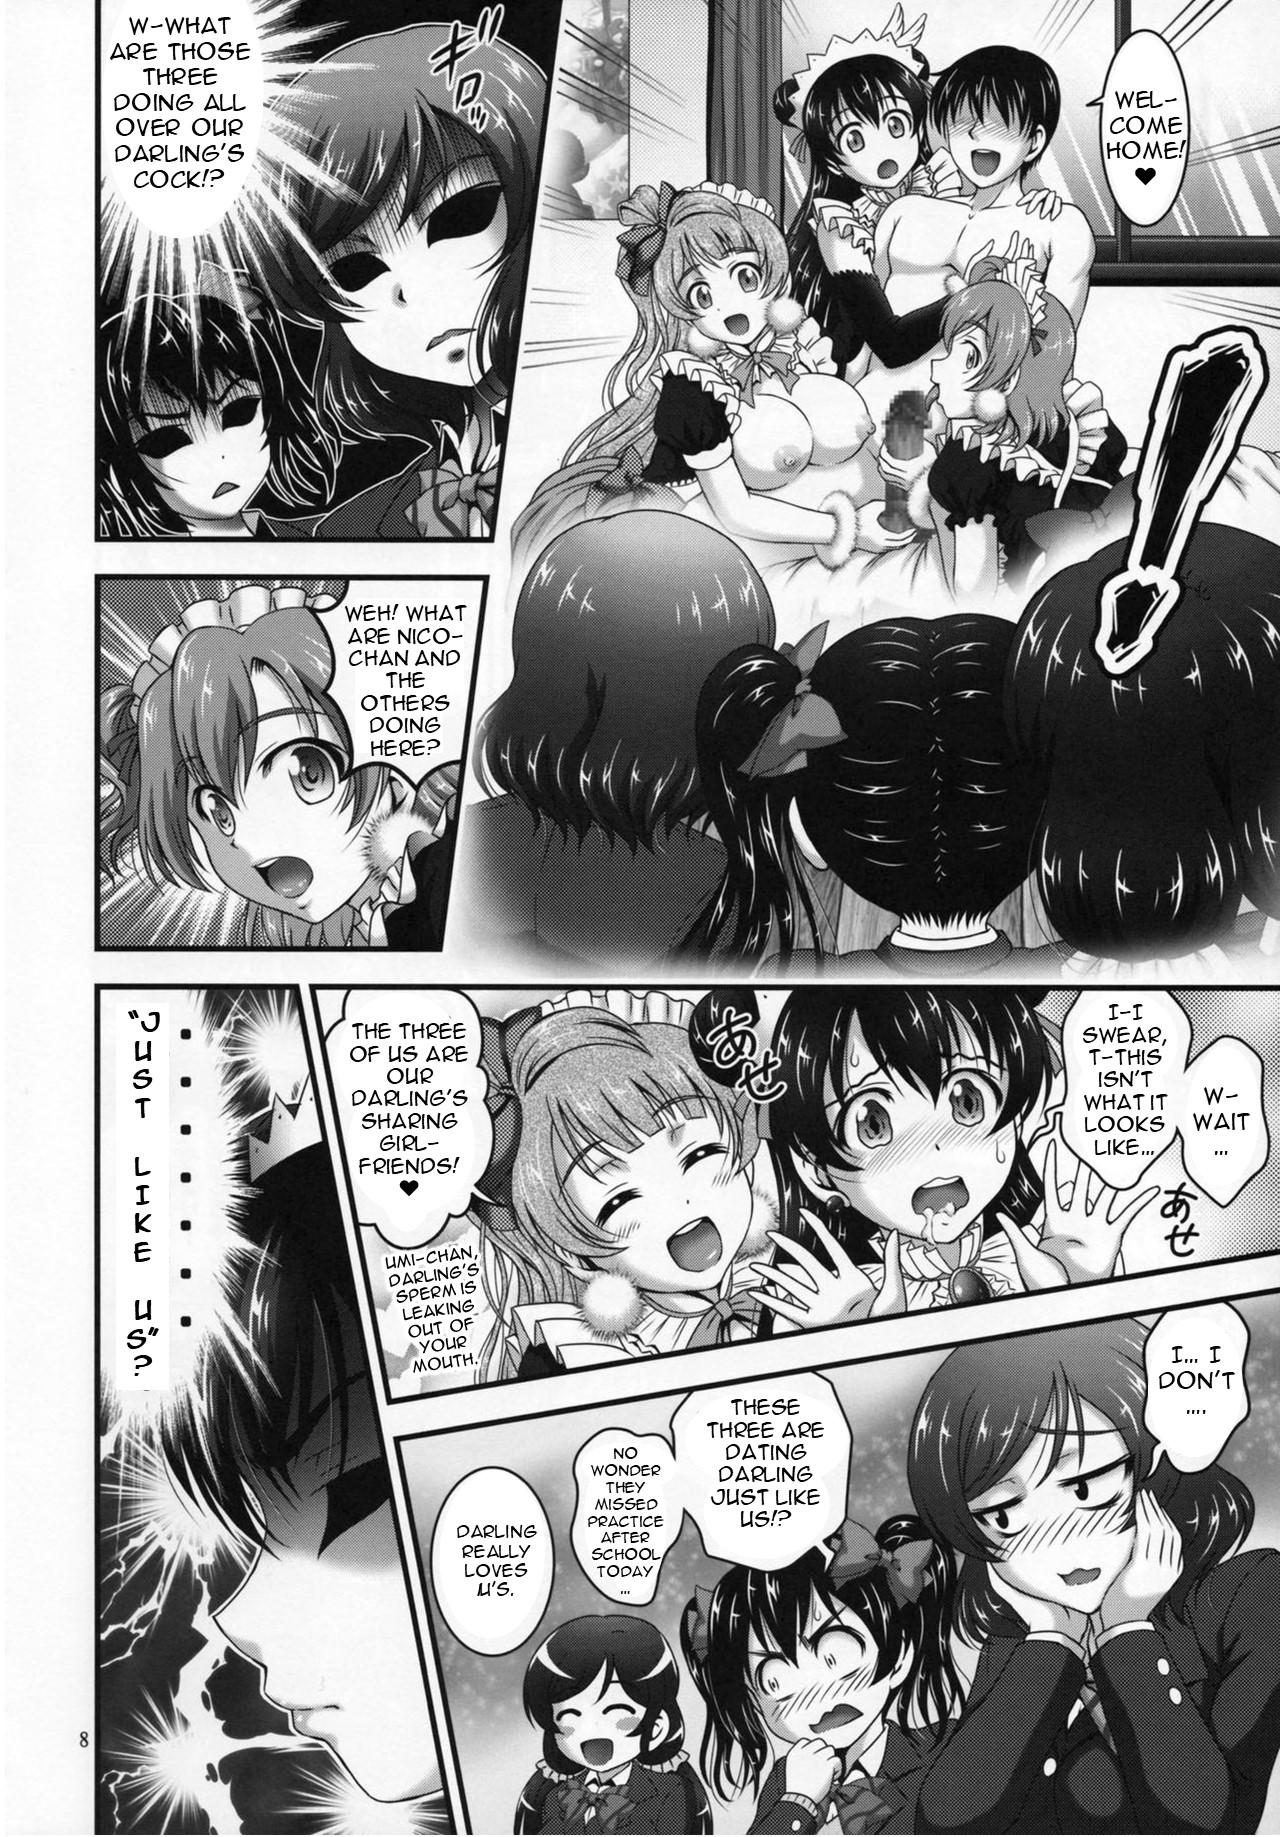 Dick Suckers Ore Yome Saimin 5 - Love live Pissing - Page 9